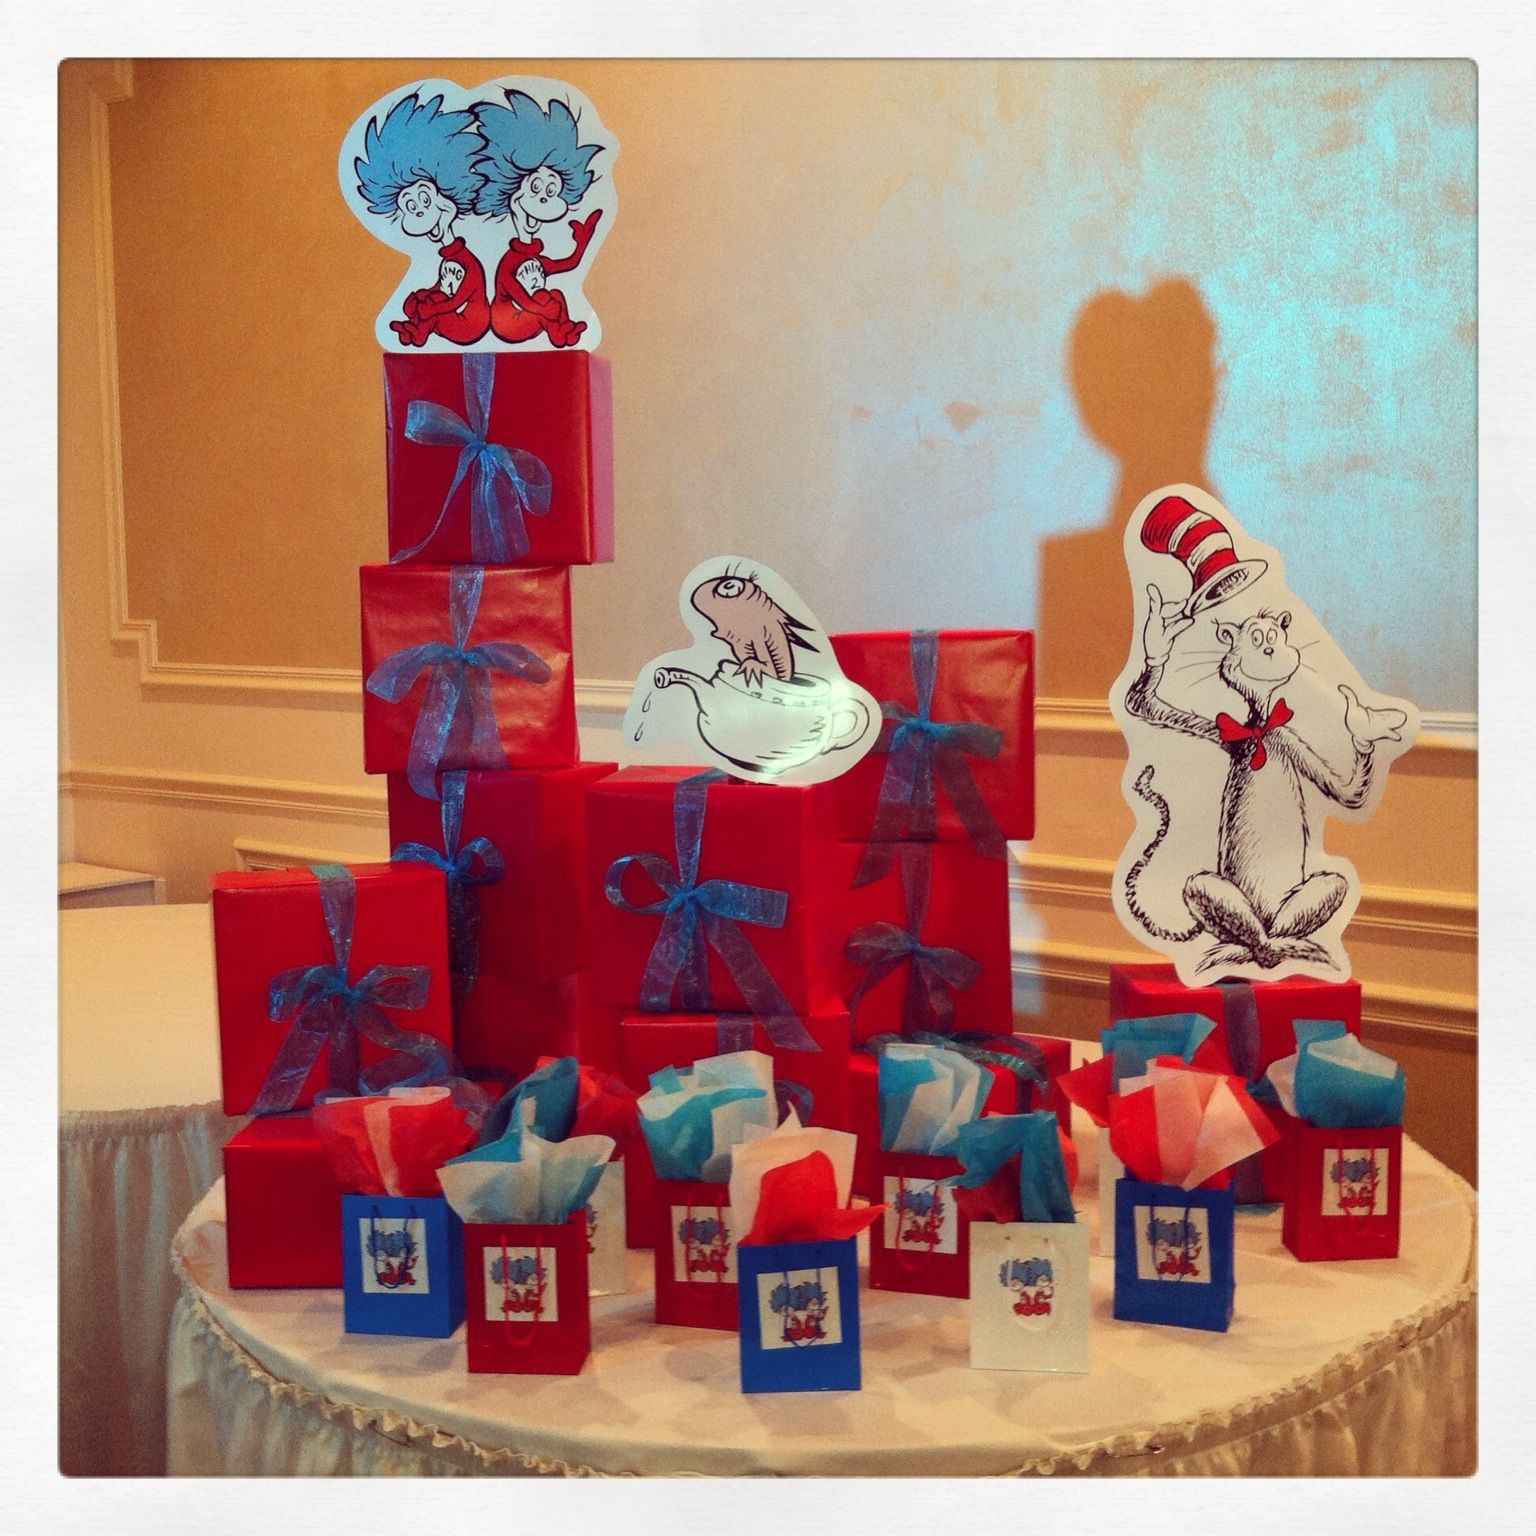 Dr Seuss Baby Gift Ideas
 Dr Suess baby shower ideas